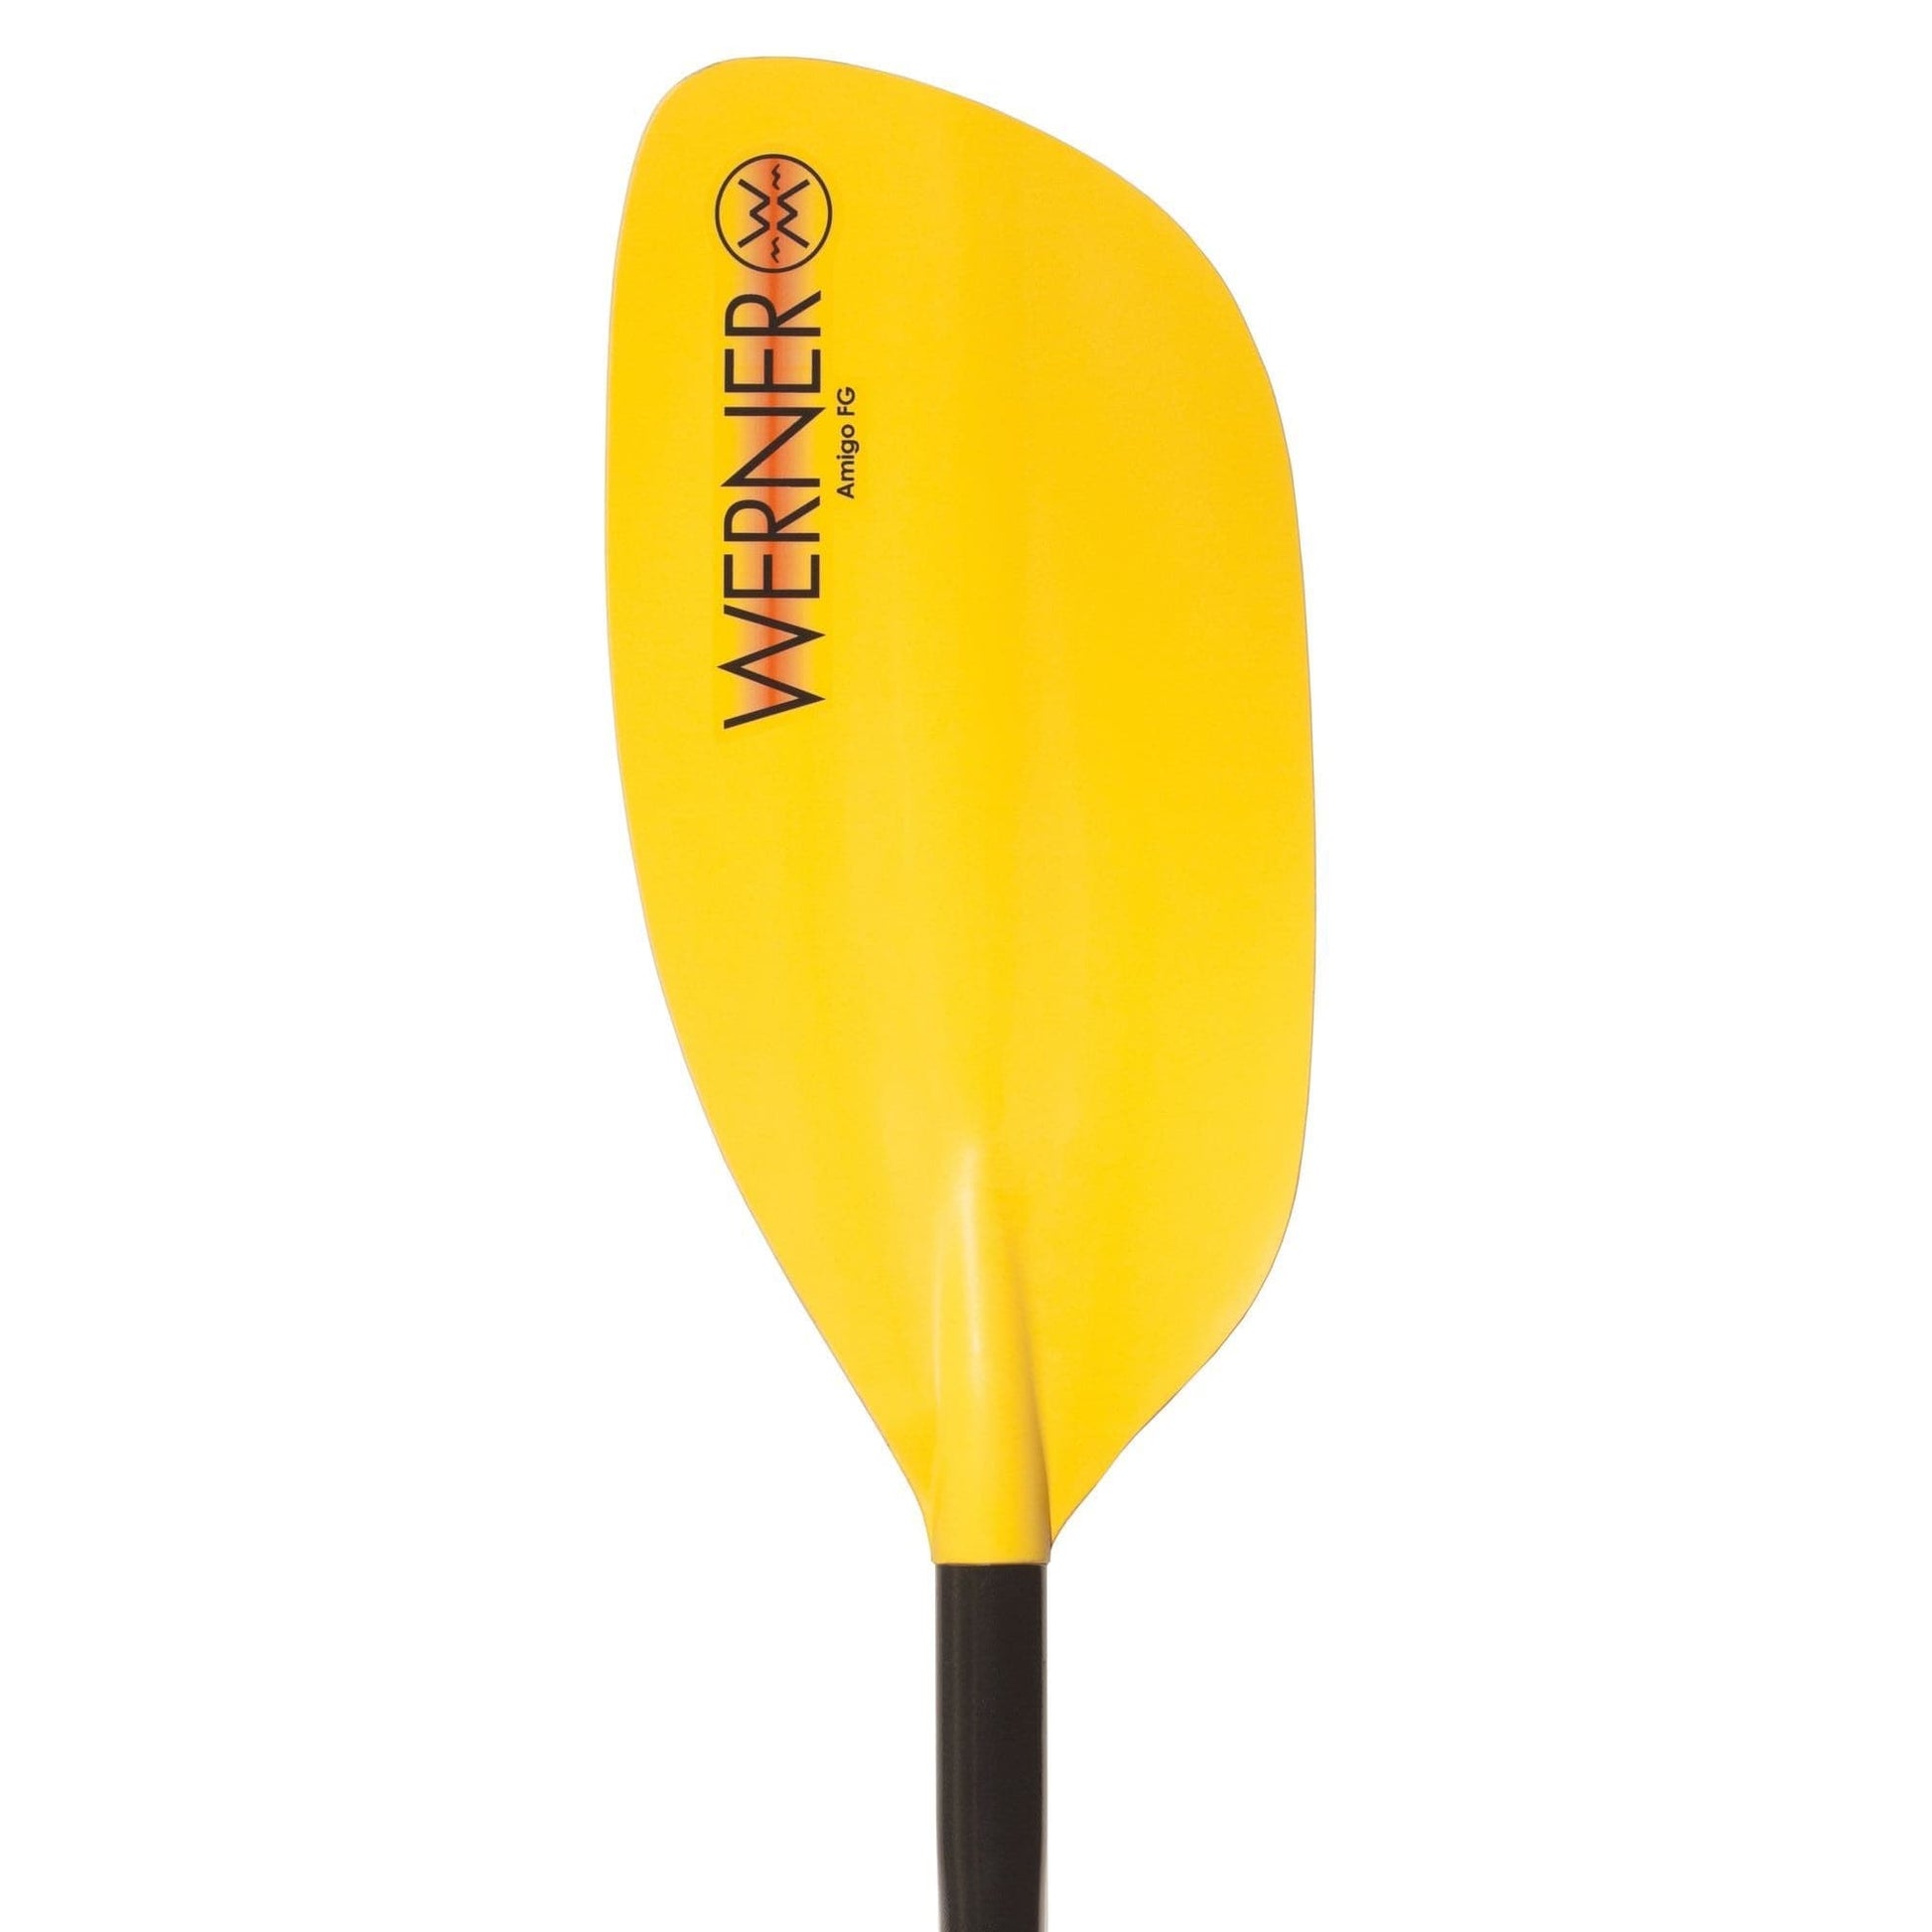 Featuring the Amigo entry level whitewater paddle, gift for kid, kid's paddle manufactured by Werner shown here from a third angle.